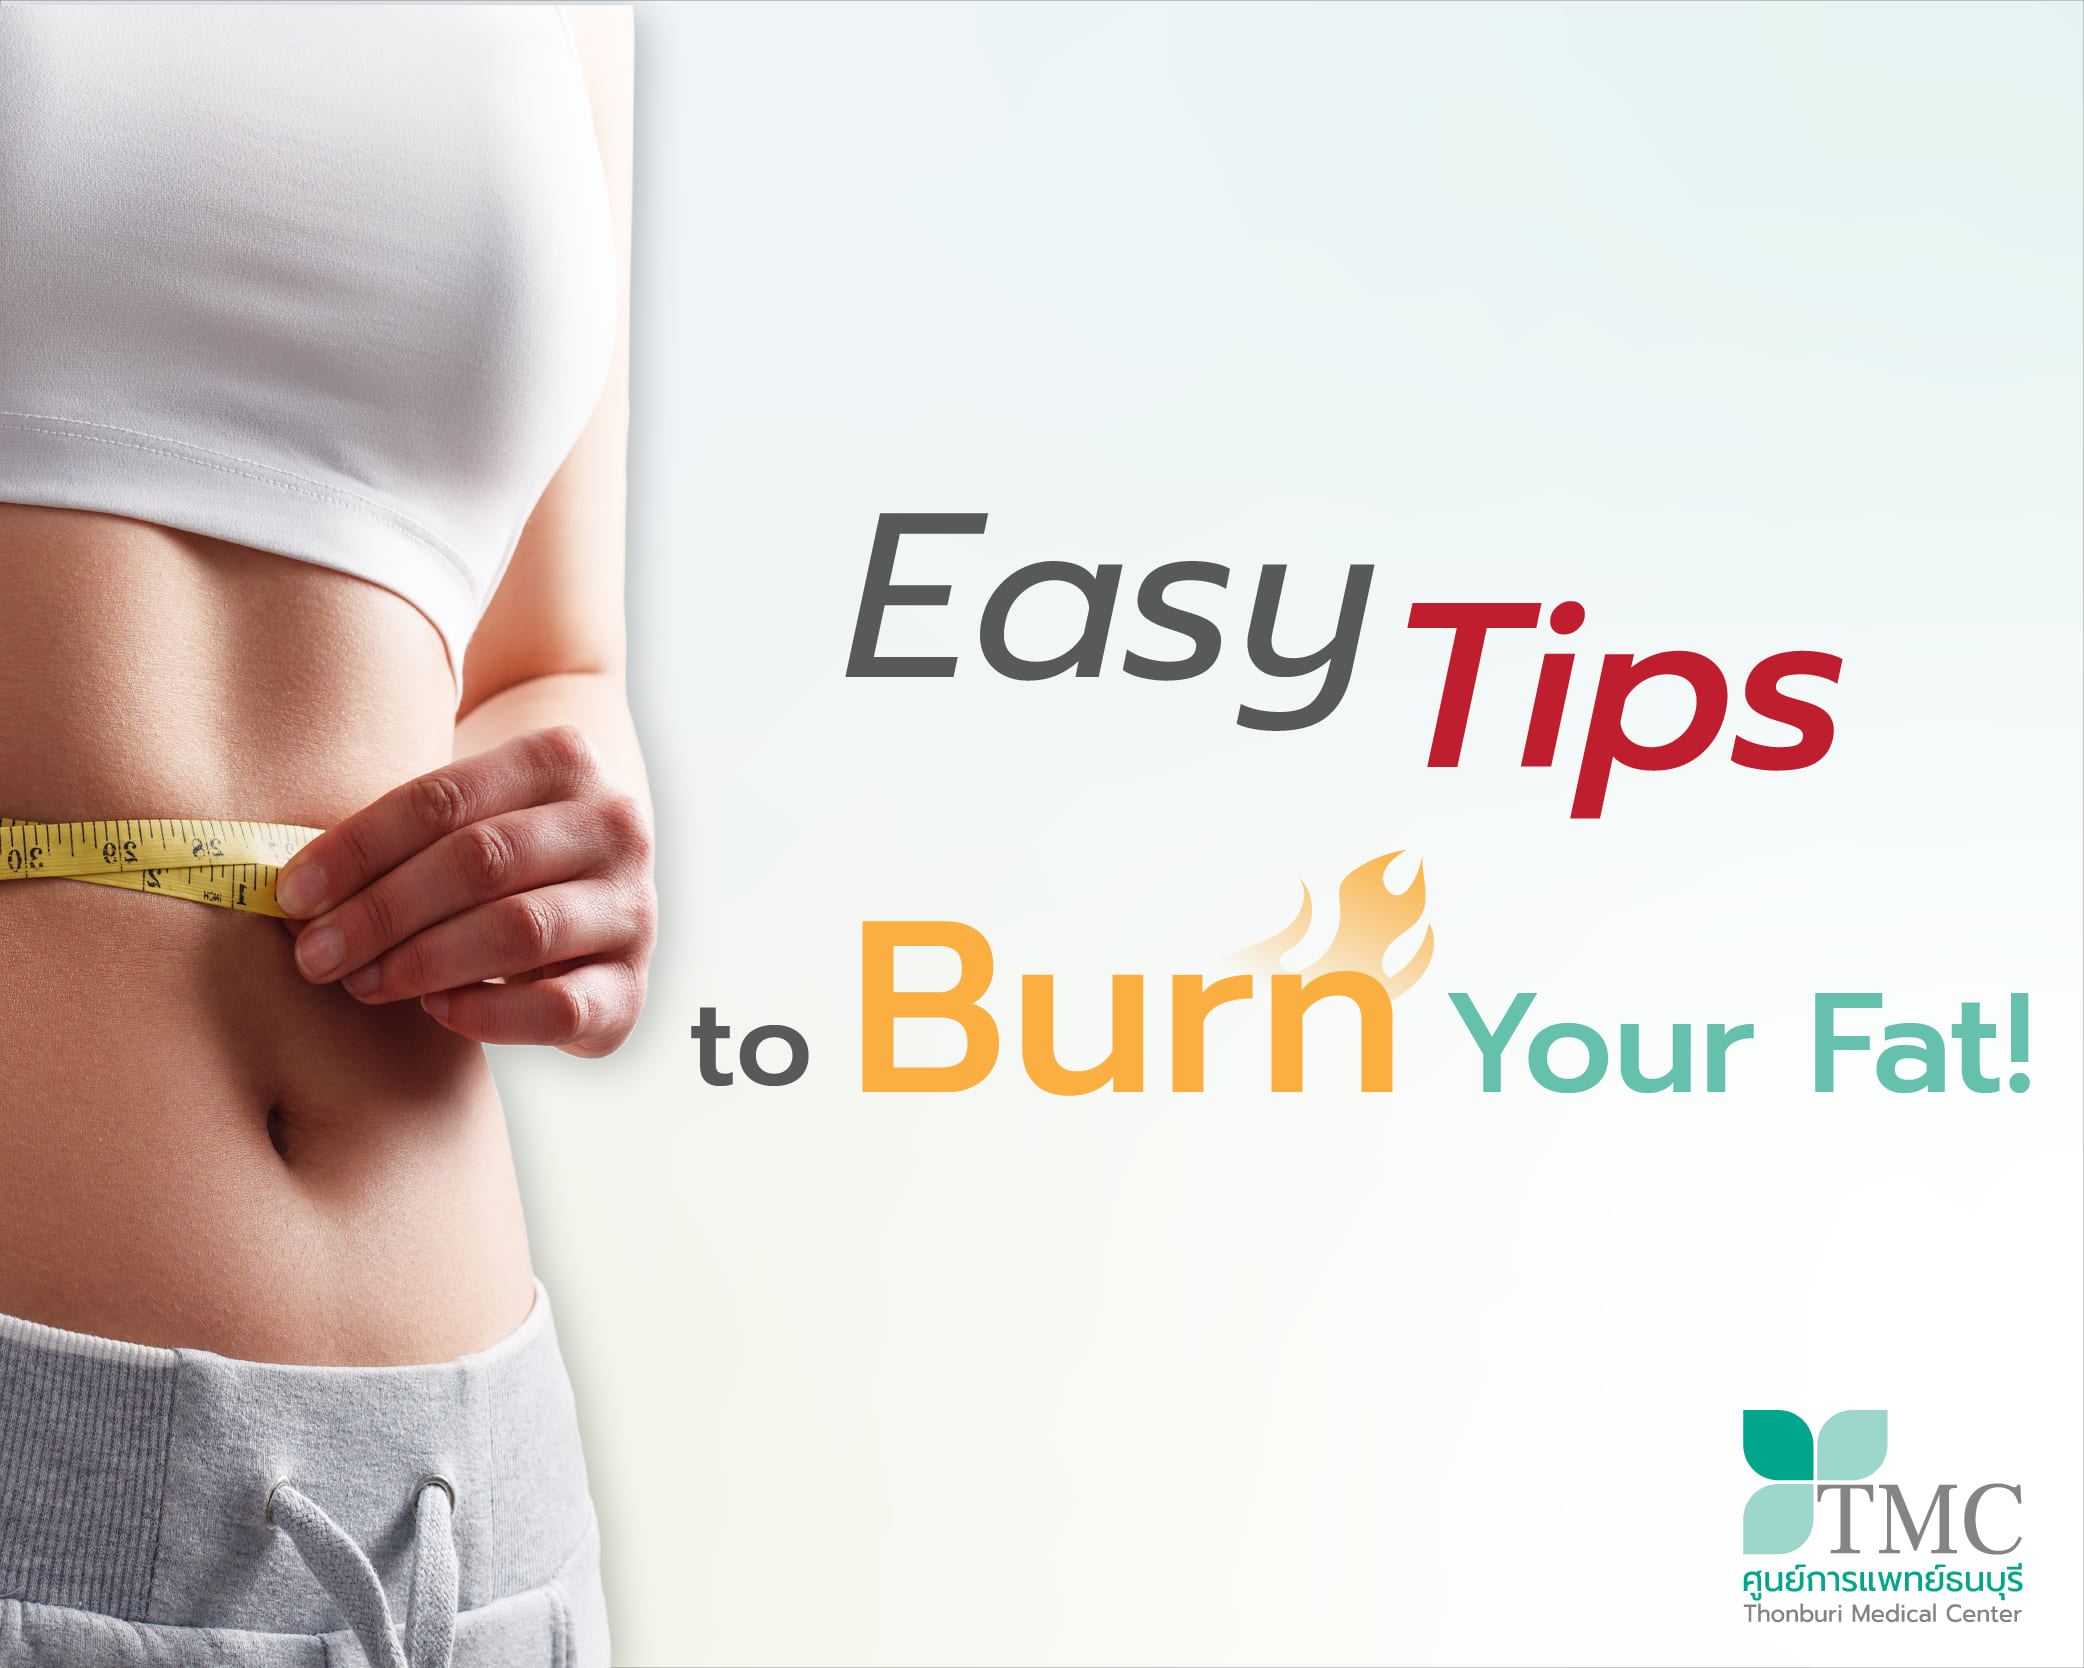 Easy Tips to Burn Your Fat!